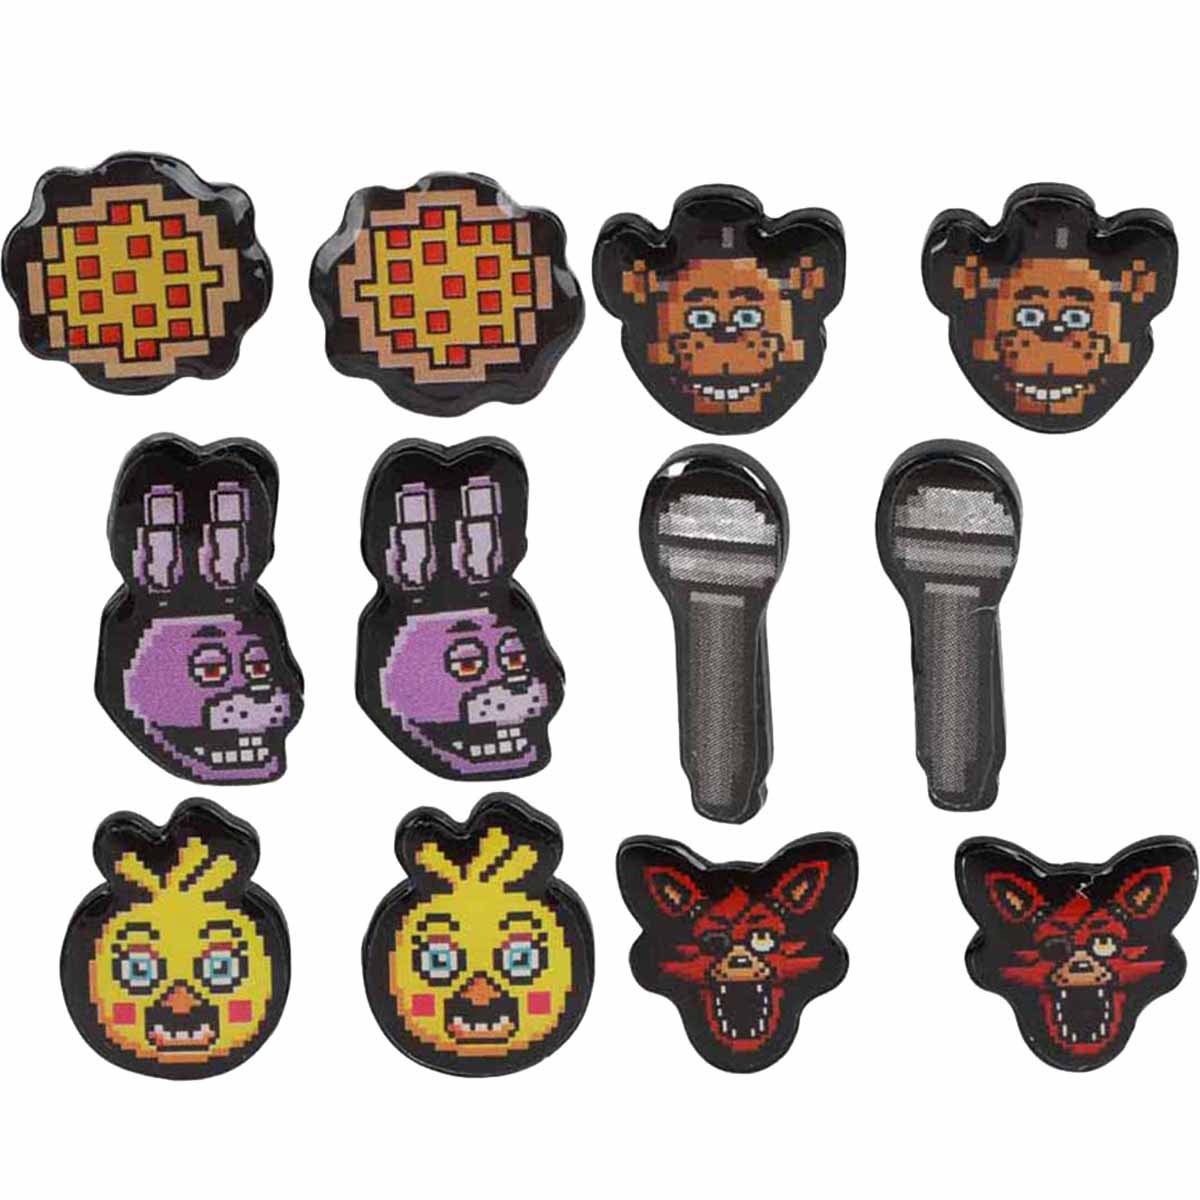 Five Nights at Freddy's Backpack 5-Piece Set